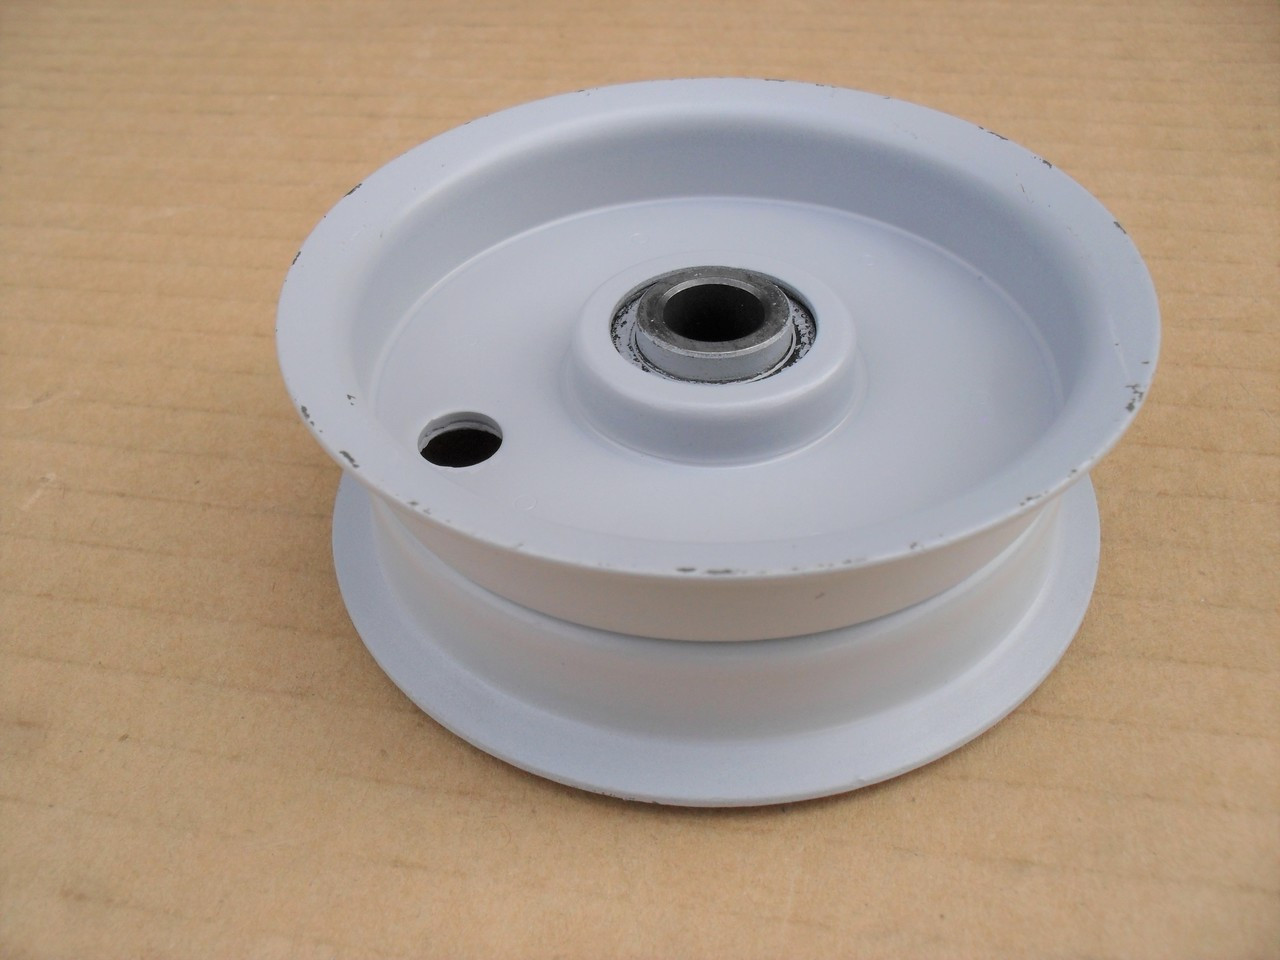 Flat Idler Pulley for Kees 363214 7019078 7019078YP 7076520 7076520YP 76520 Height: 1-1/8 " ID: 3/8 " OD: 3-1/8 "